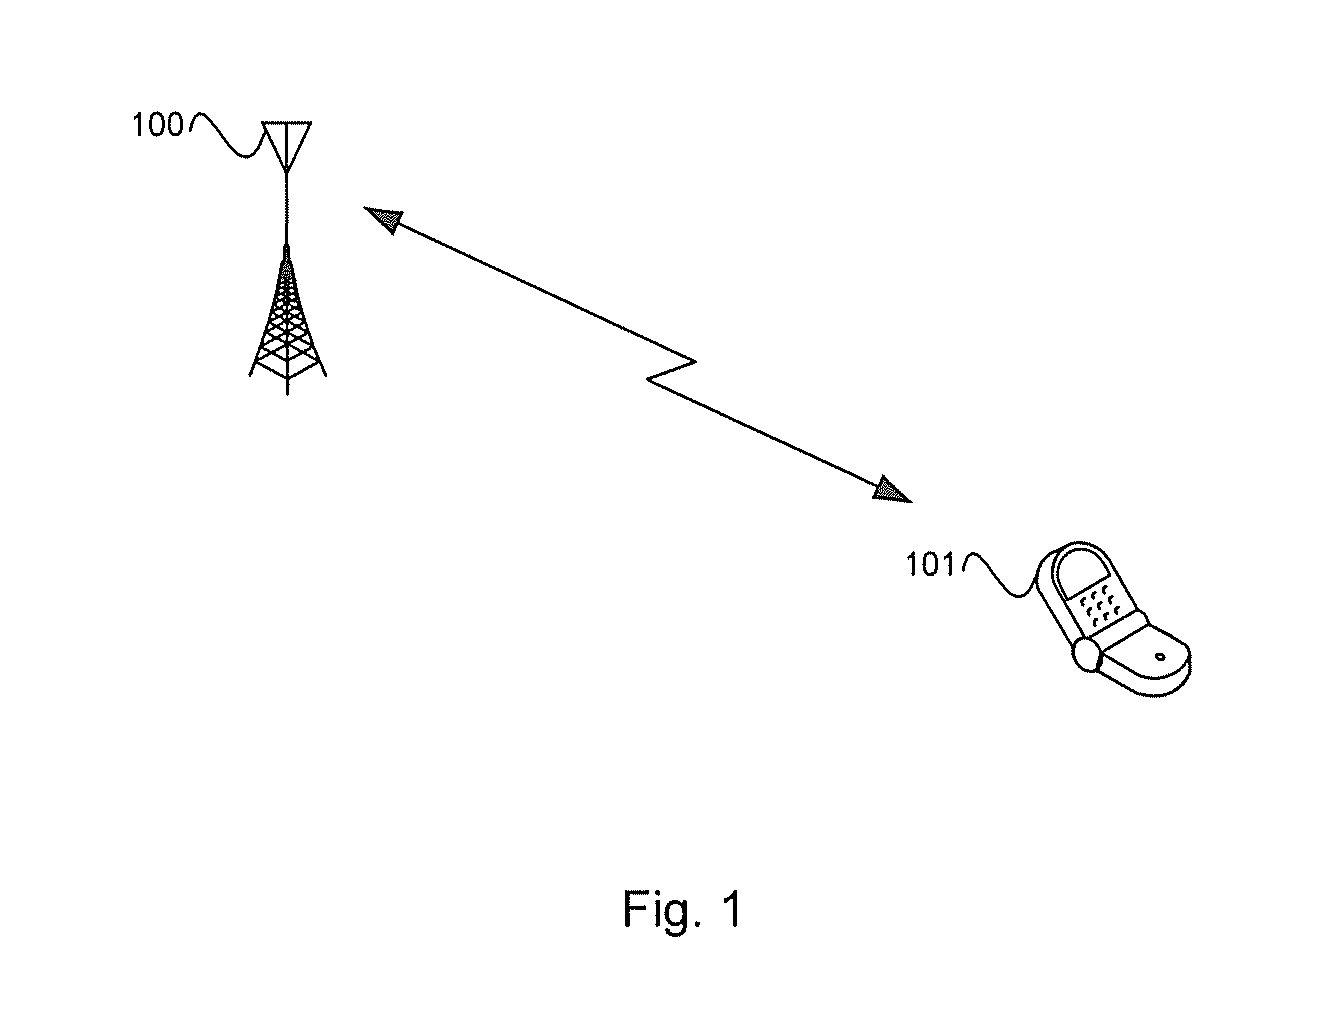 Method and System for Minimizing Power Consumption in a Communication System